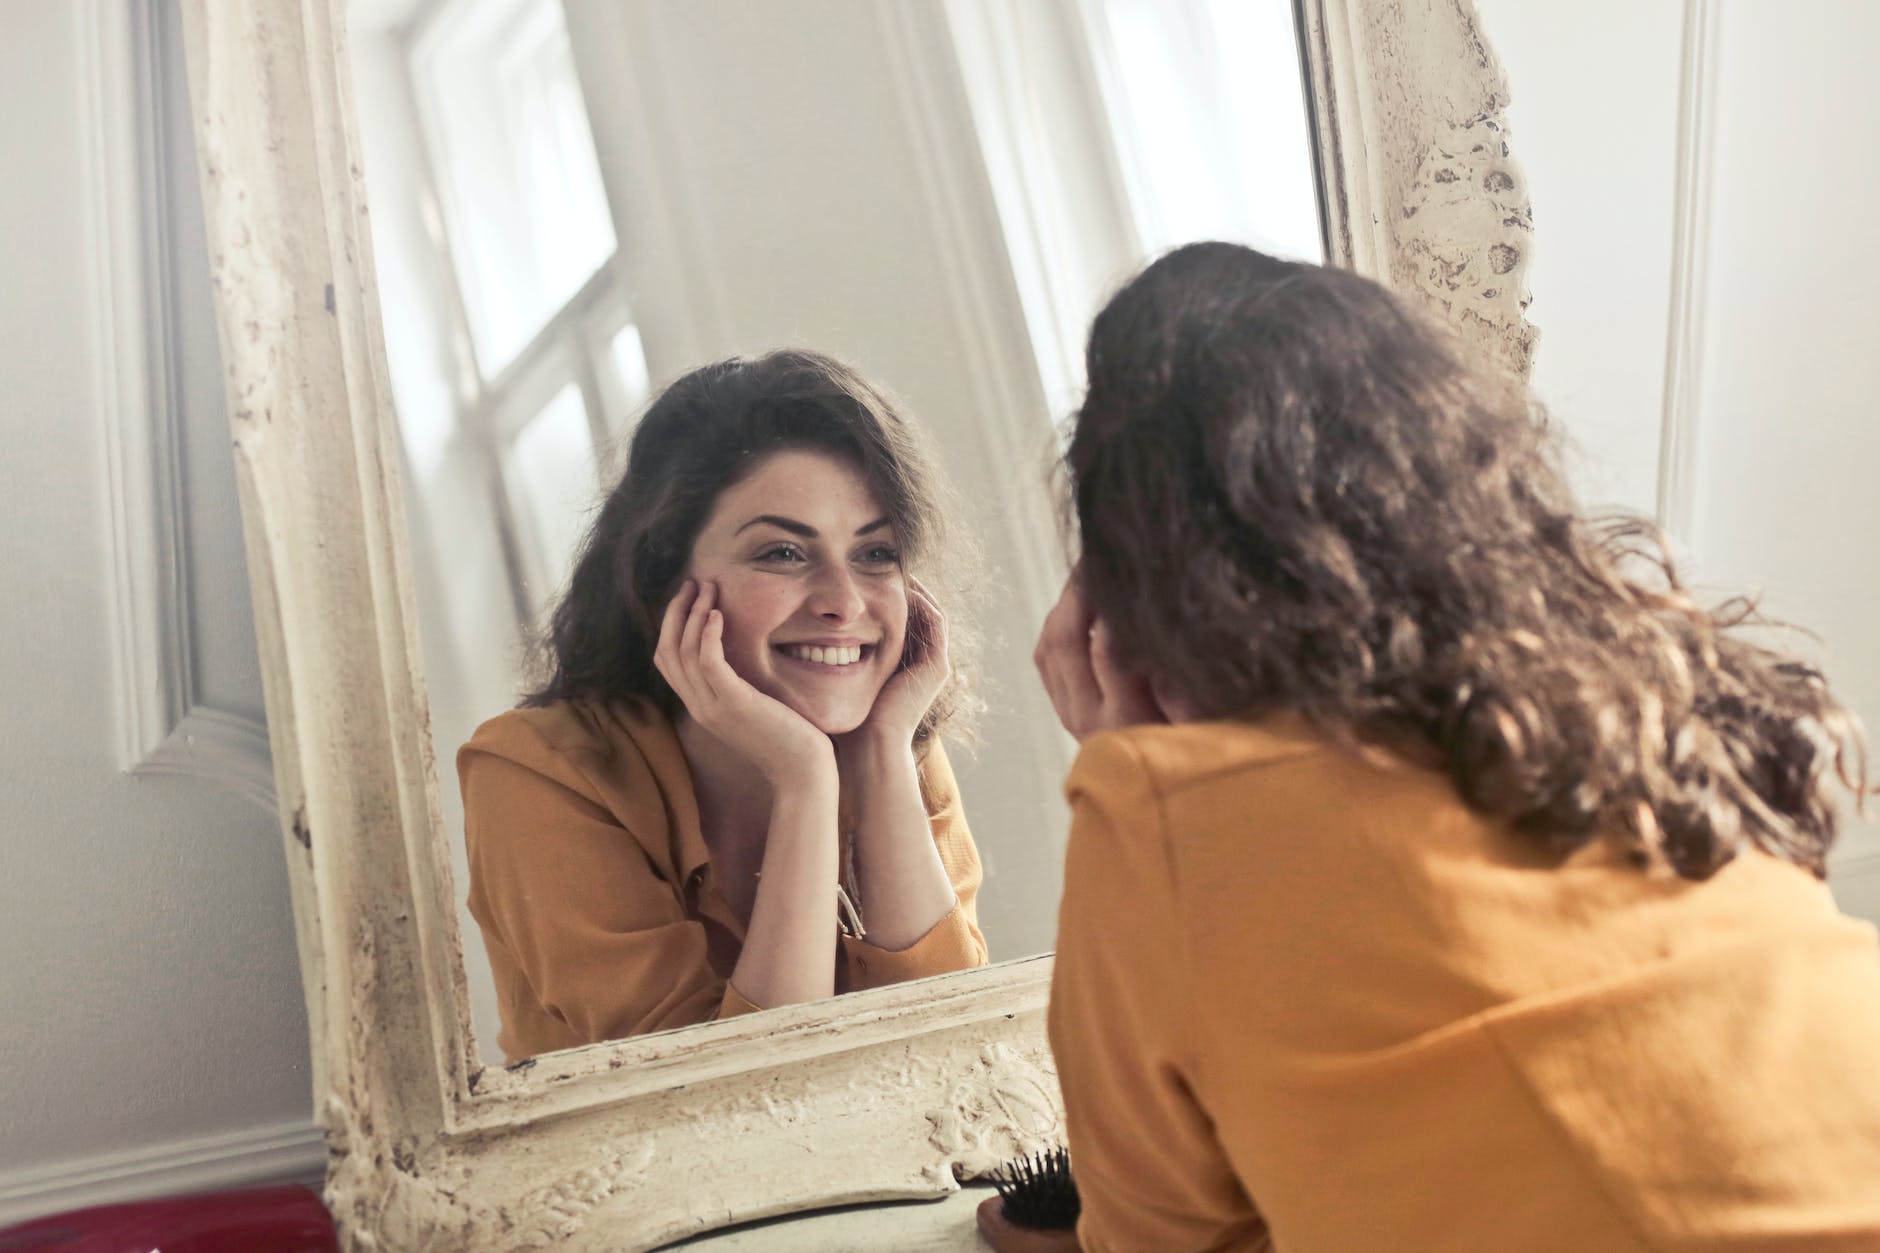 A person standing in front of the mirror and smiling symbolizing the empowerment achieved through positive self-talk.